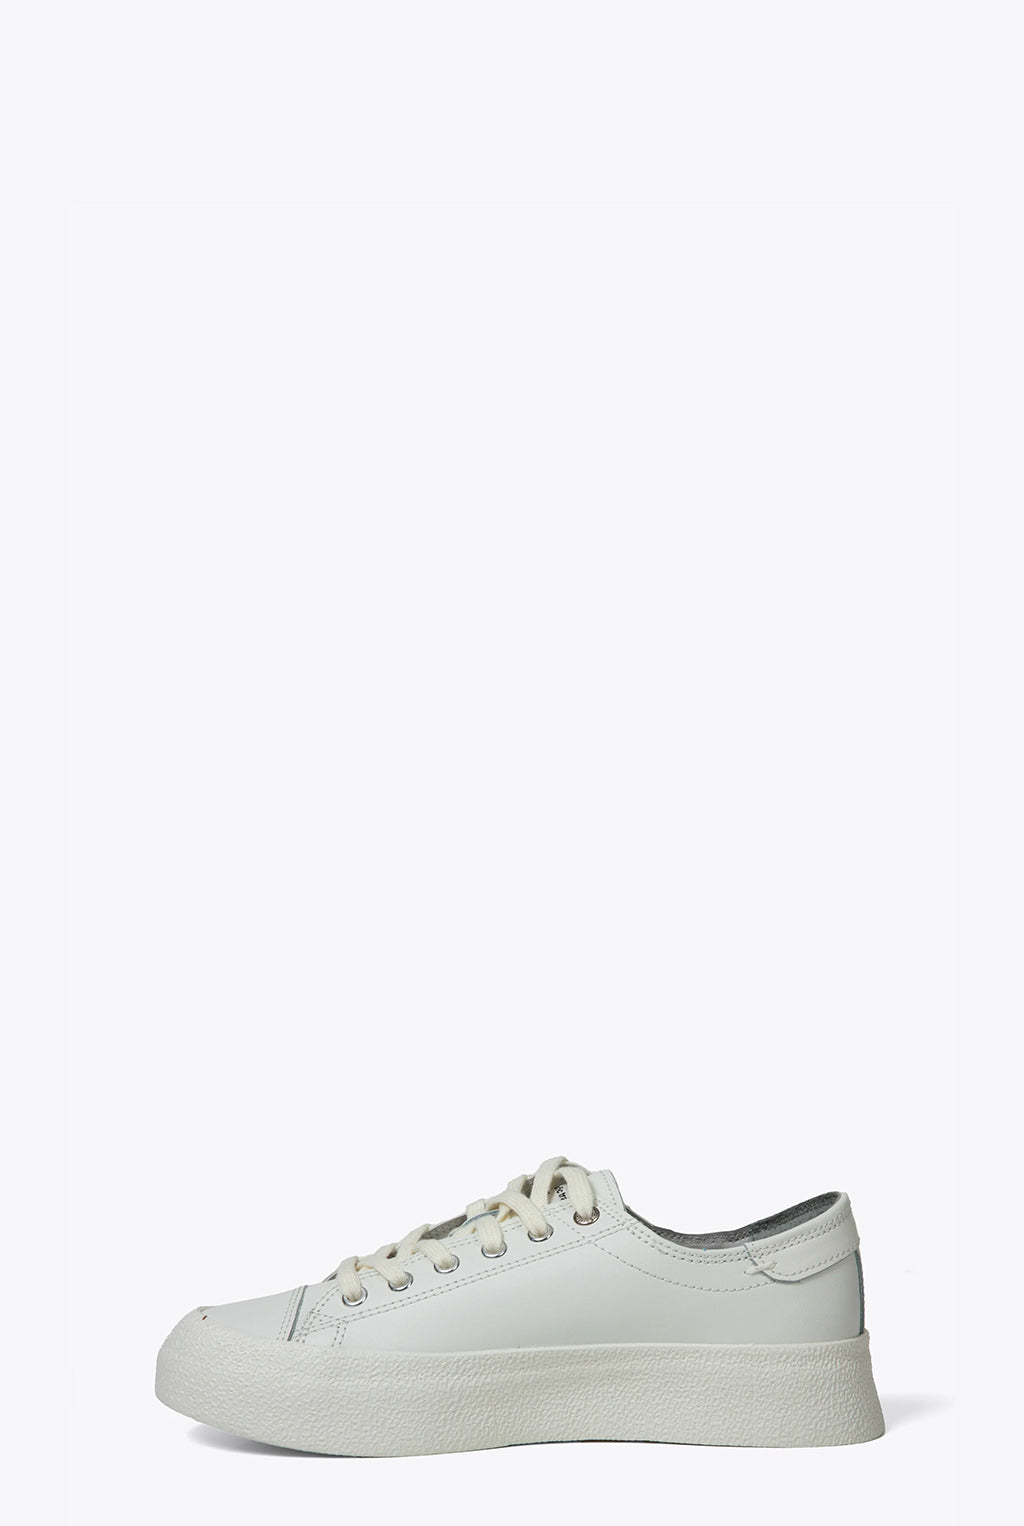 alt-image__White-leather-low-sneaker